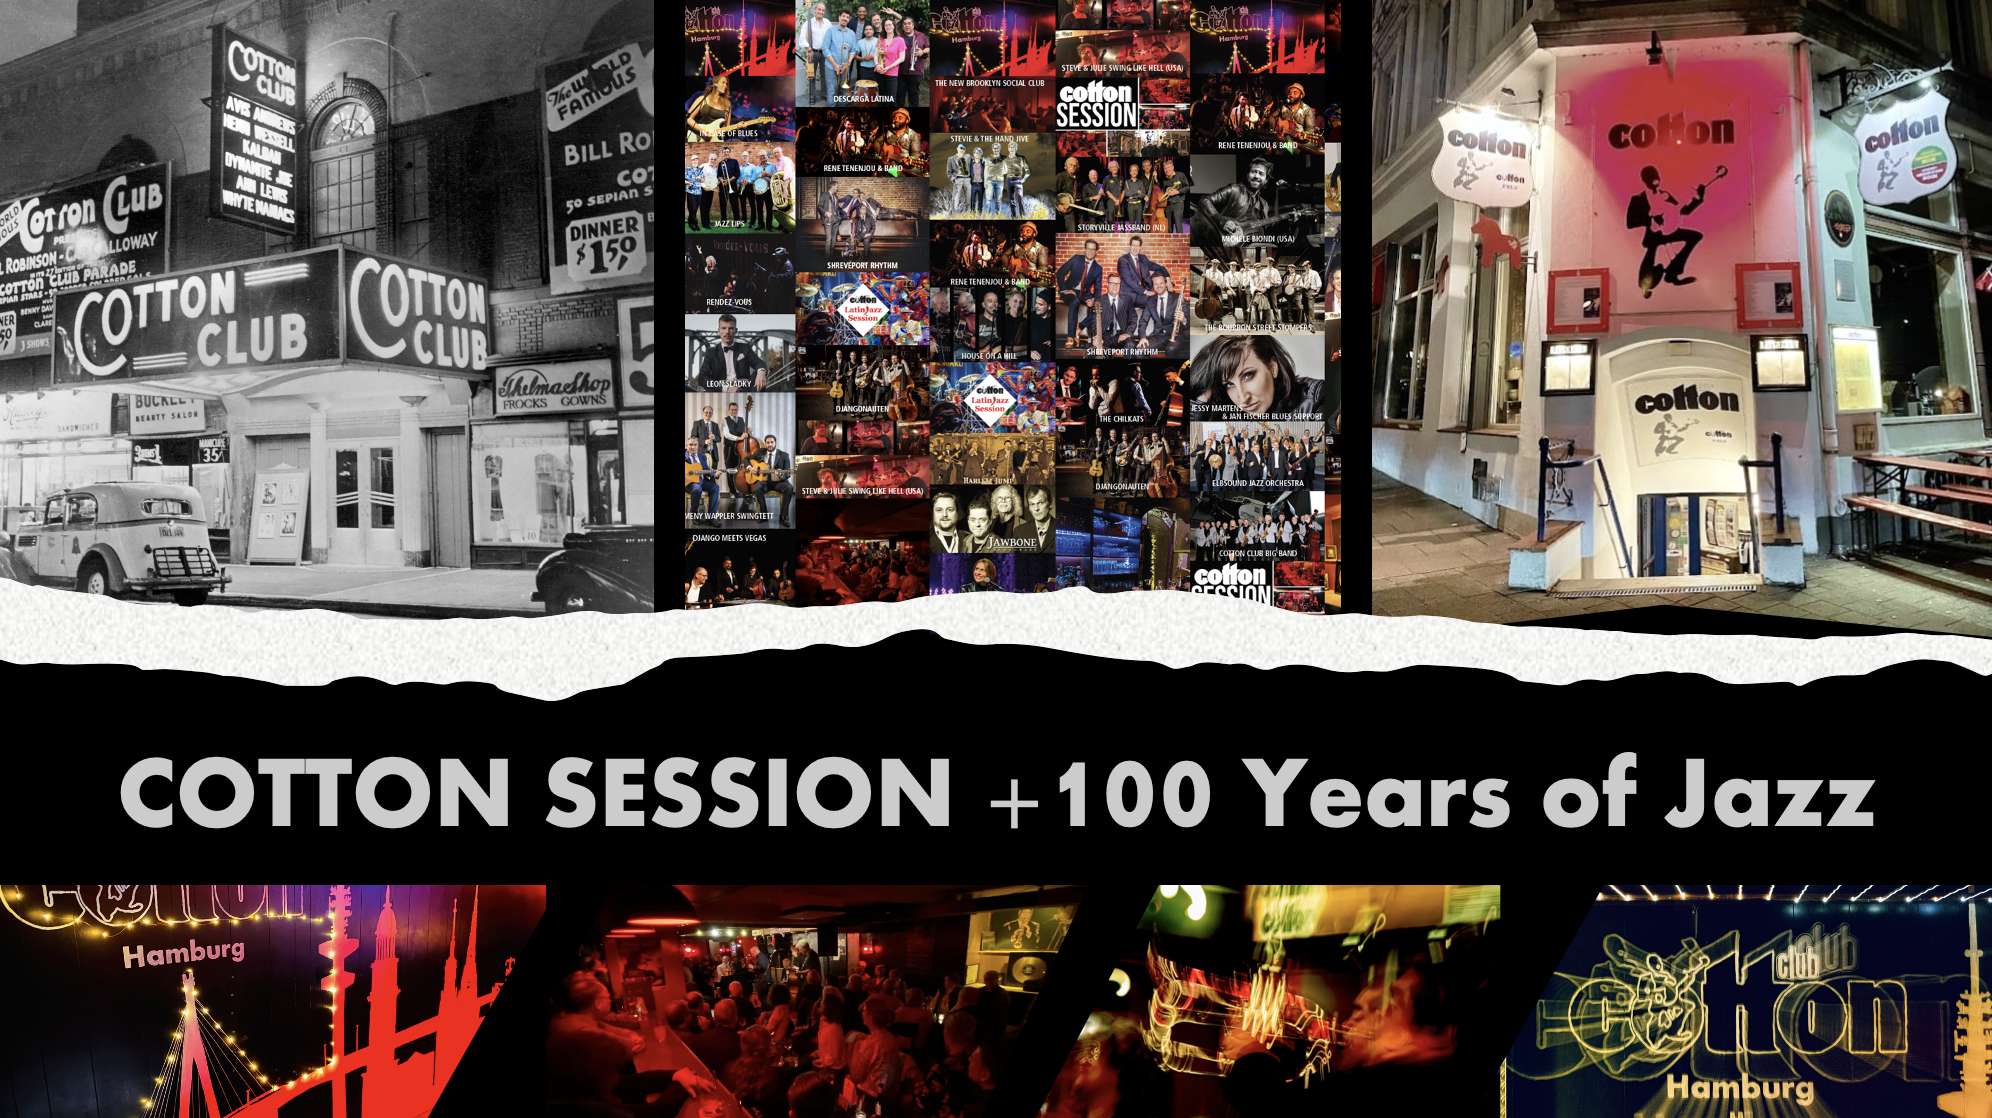 COTTON SESSION +100 YEARS OF JAZZ - led by Hause Strebel (New Orleans)